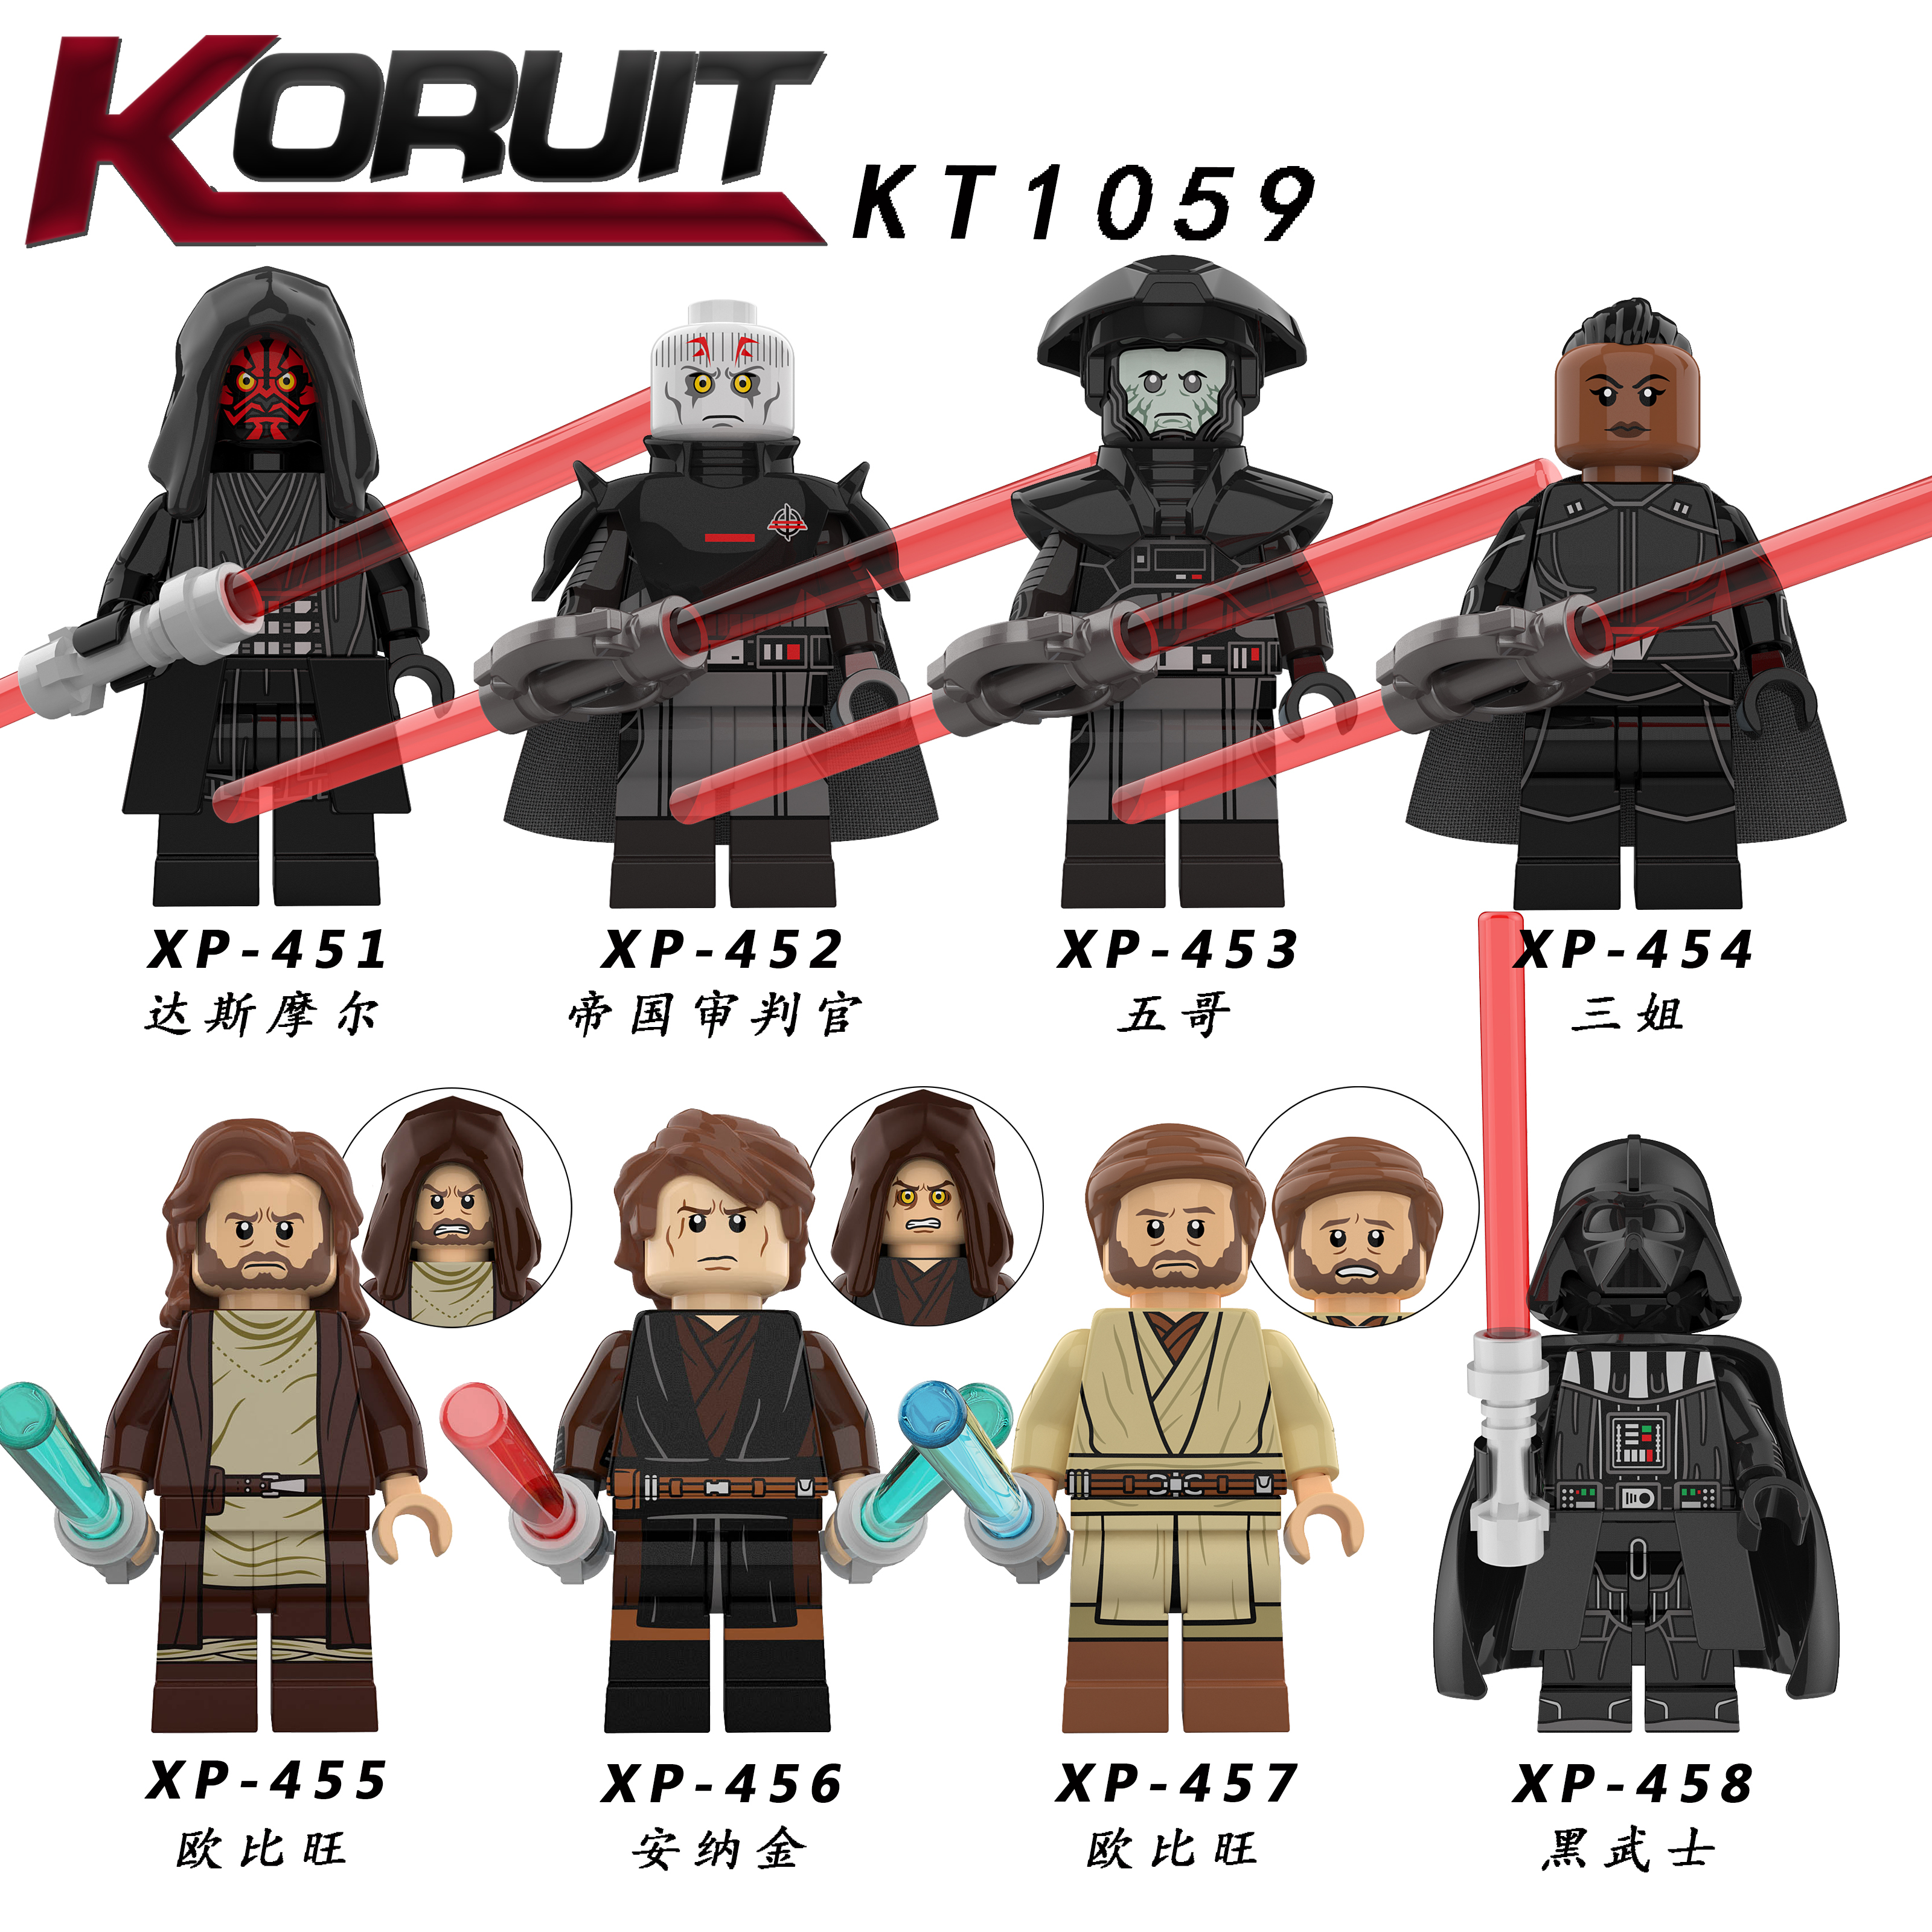  KT1059 XP451 XP452 XP453 XP454 XP455 XP456 XP457 XP458 XP467 Star Wars  Darth Maul Obi Wan Anakin Movie Series Building Blocks Action Figures Educational Toys For Kids Gifts